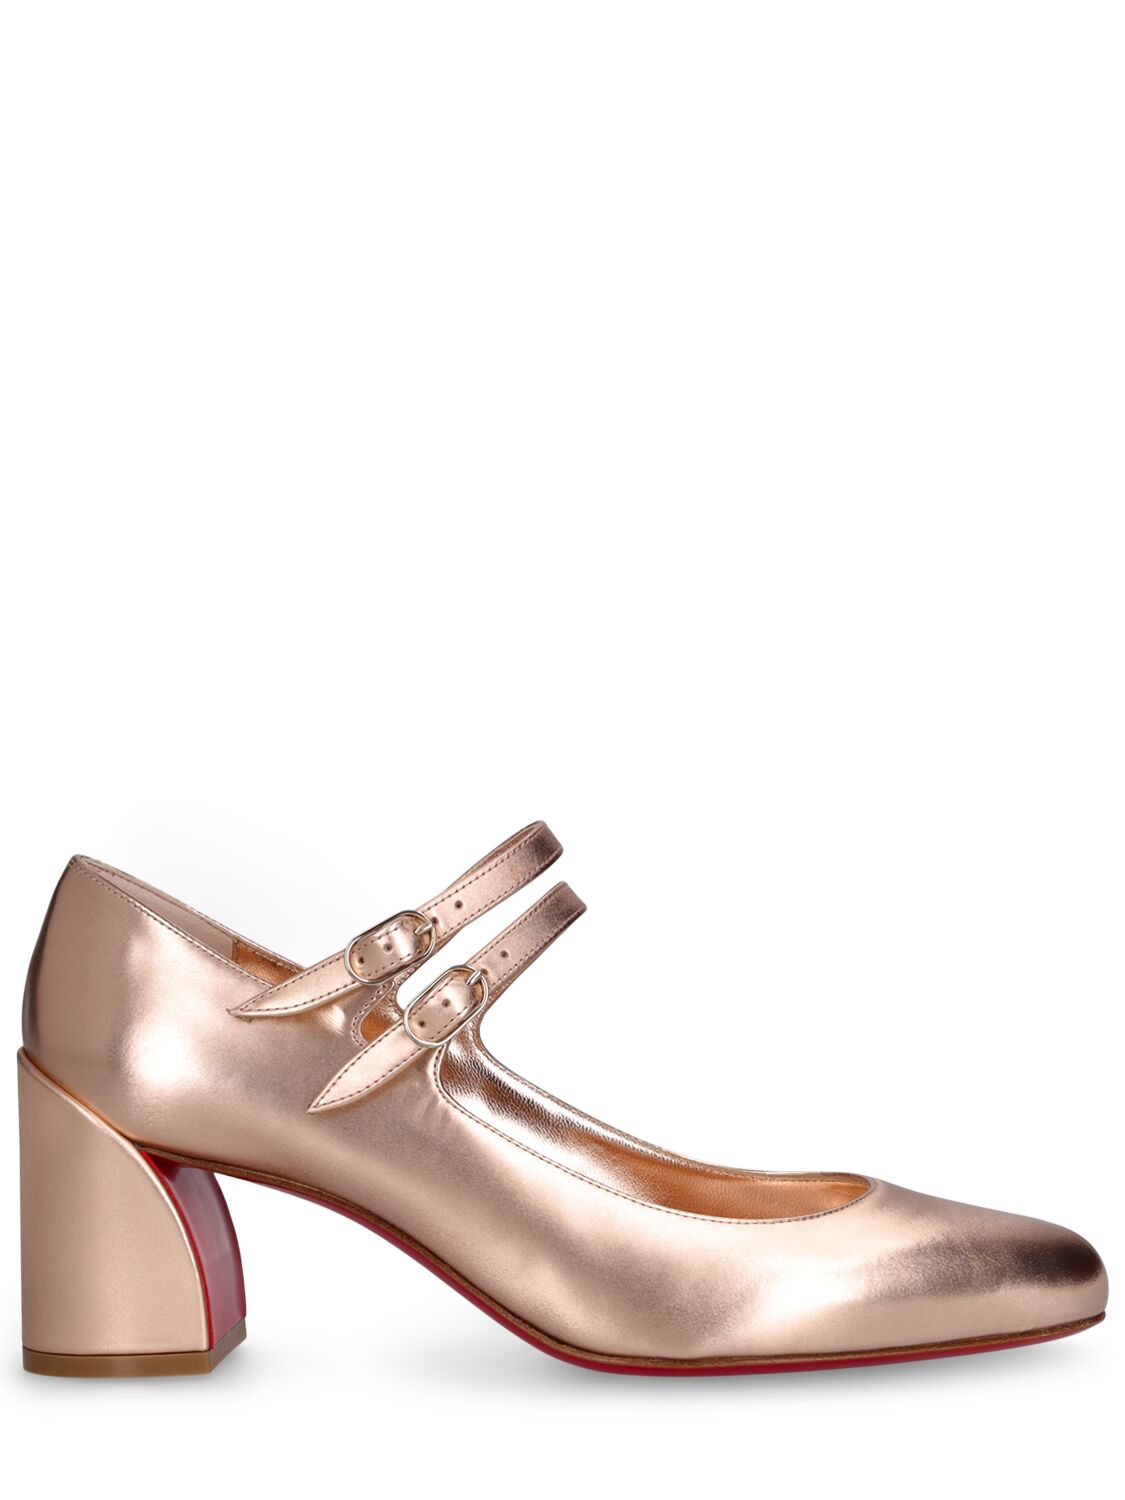 Christian Louboutin 55mm Miss Jane Laminated Leather Pumps In Light Gold